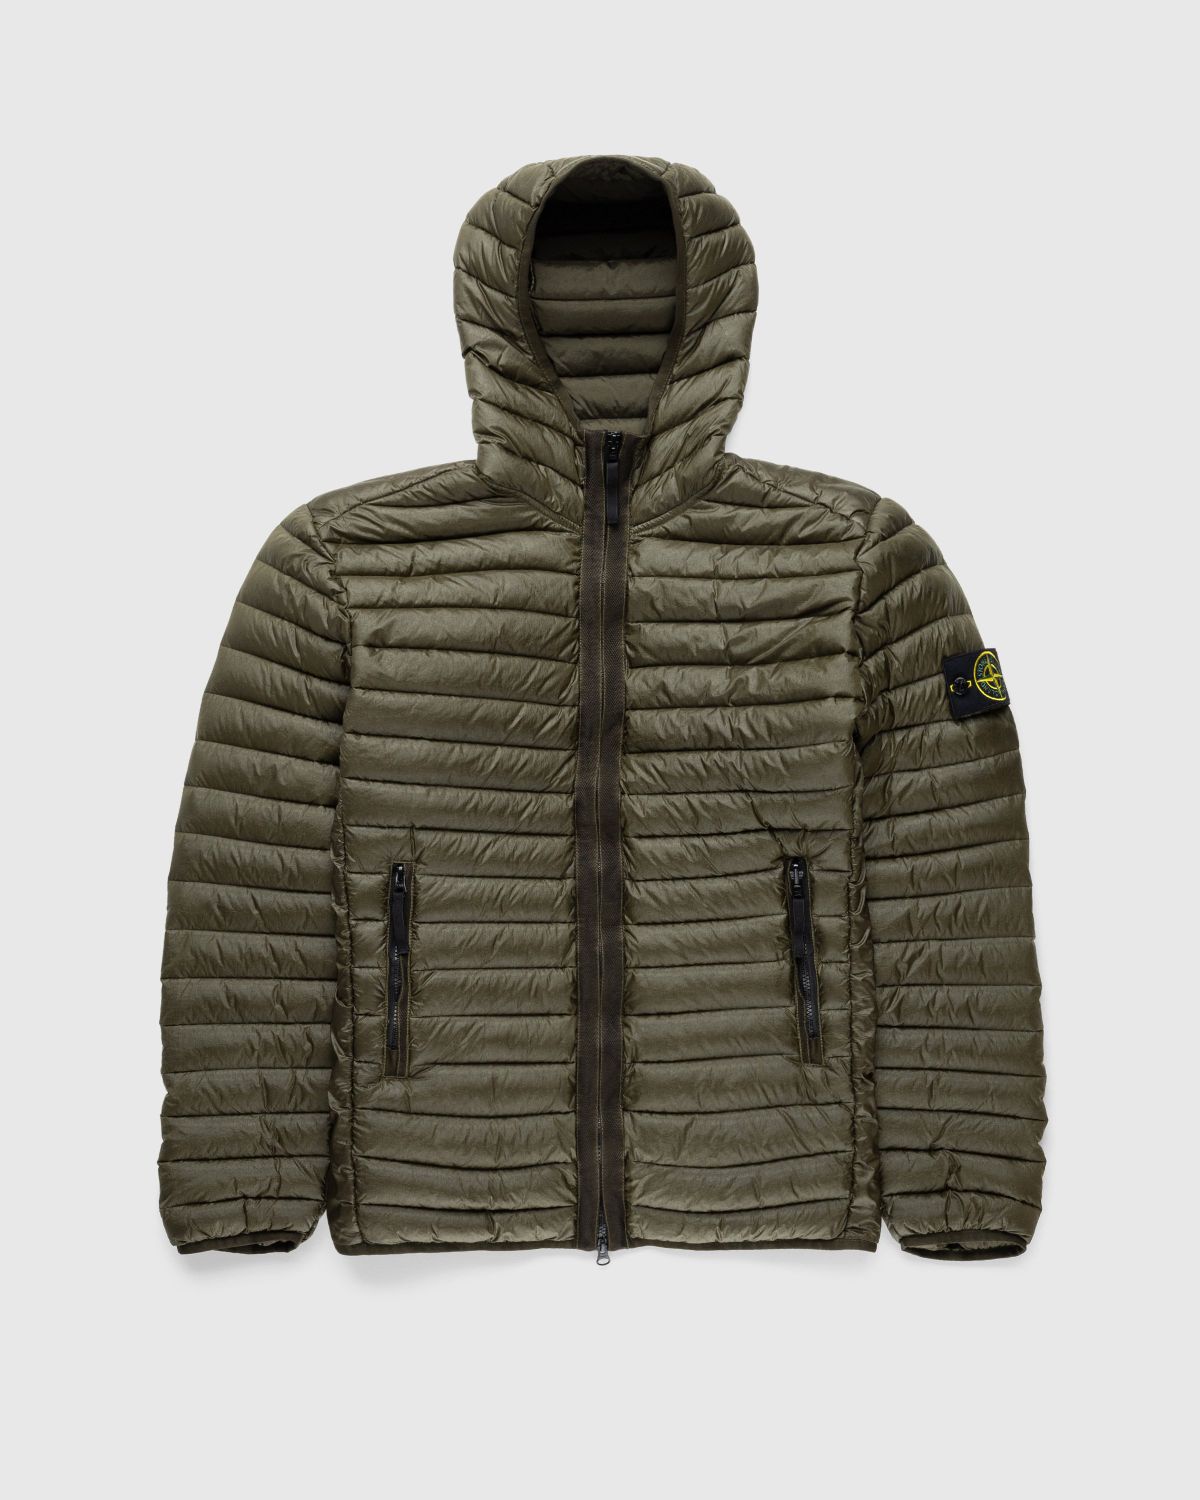 Stone Island – Packable Recycled Nylon Down Jacket Olive - Outerwear - Green - Image 1